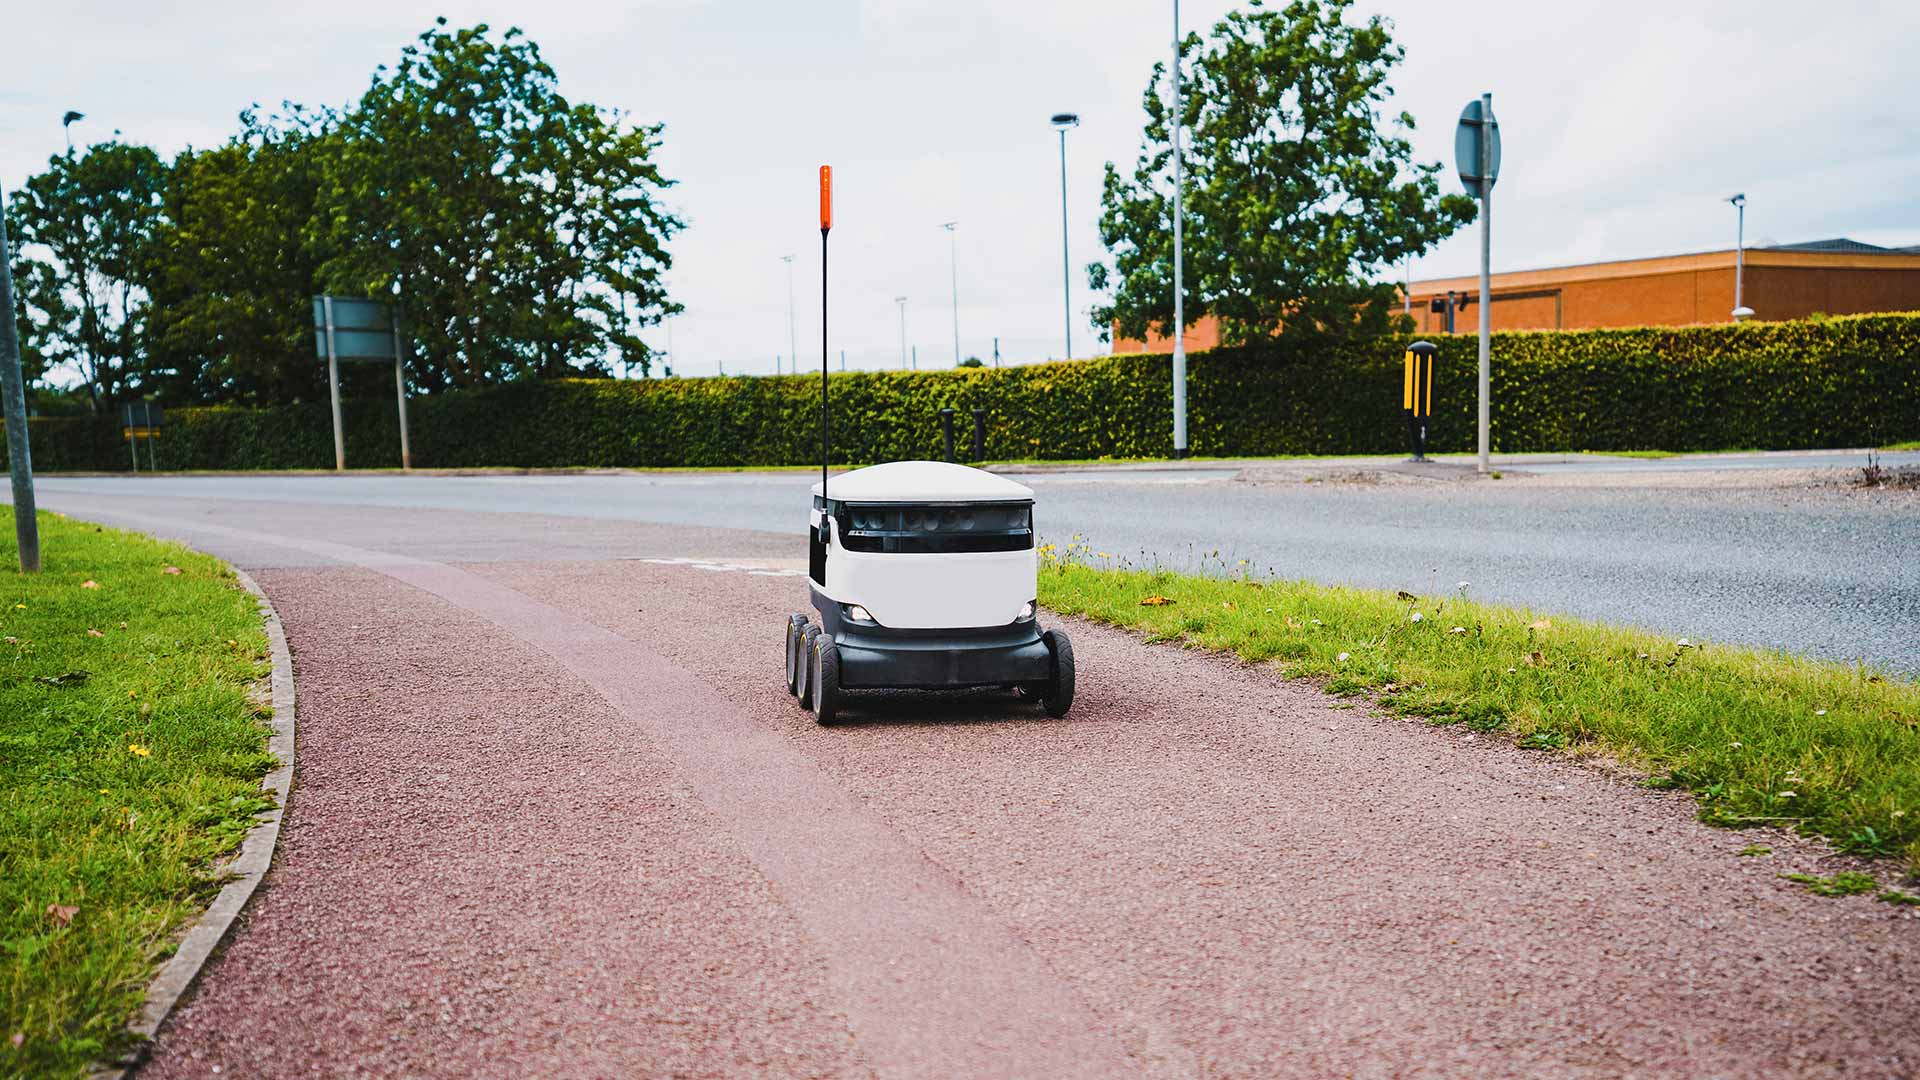 Moving delivery robot on public footpath